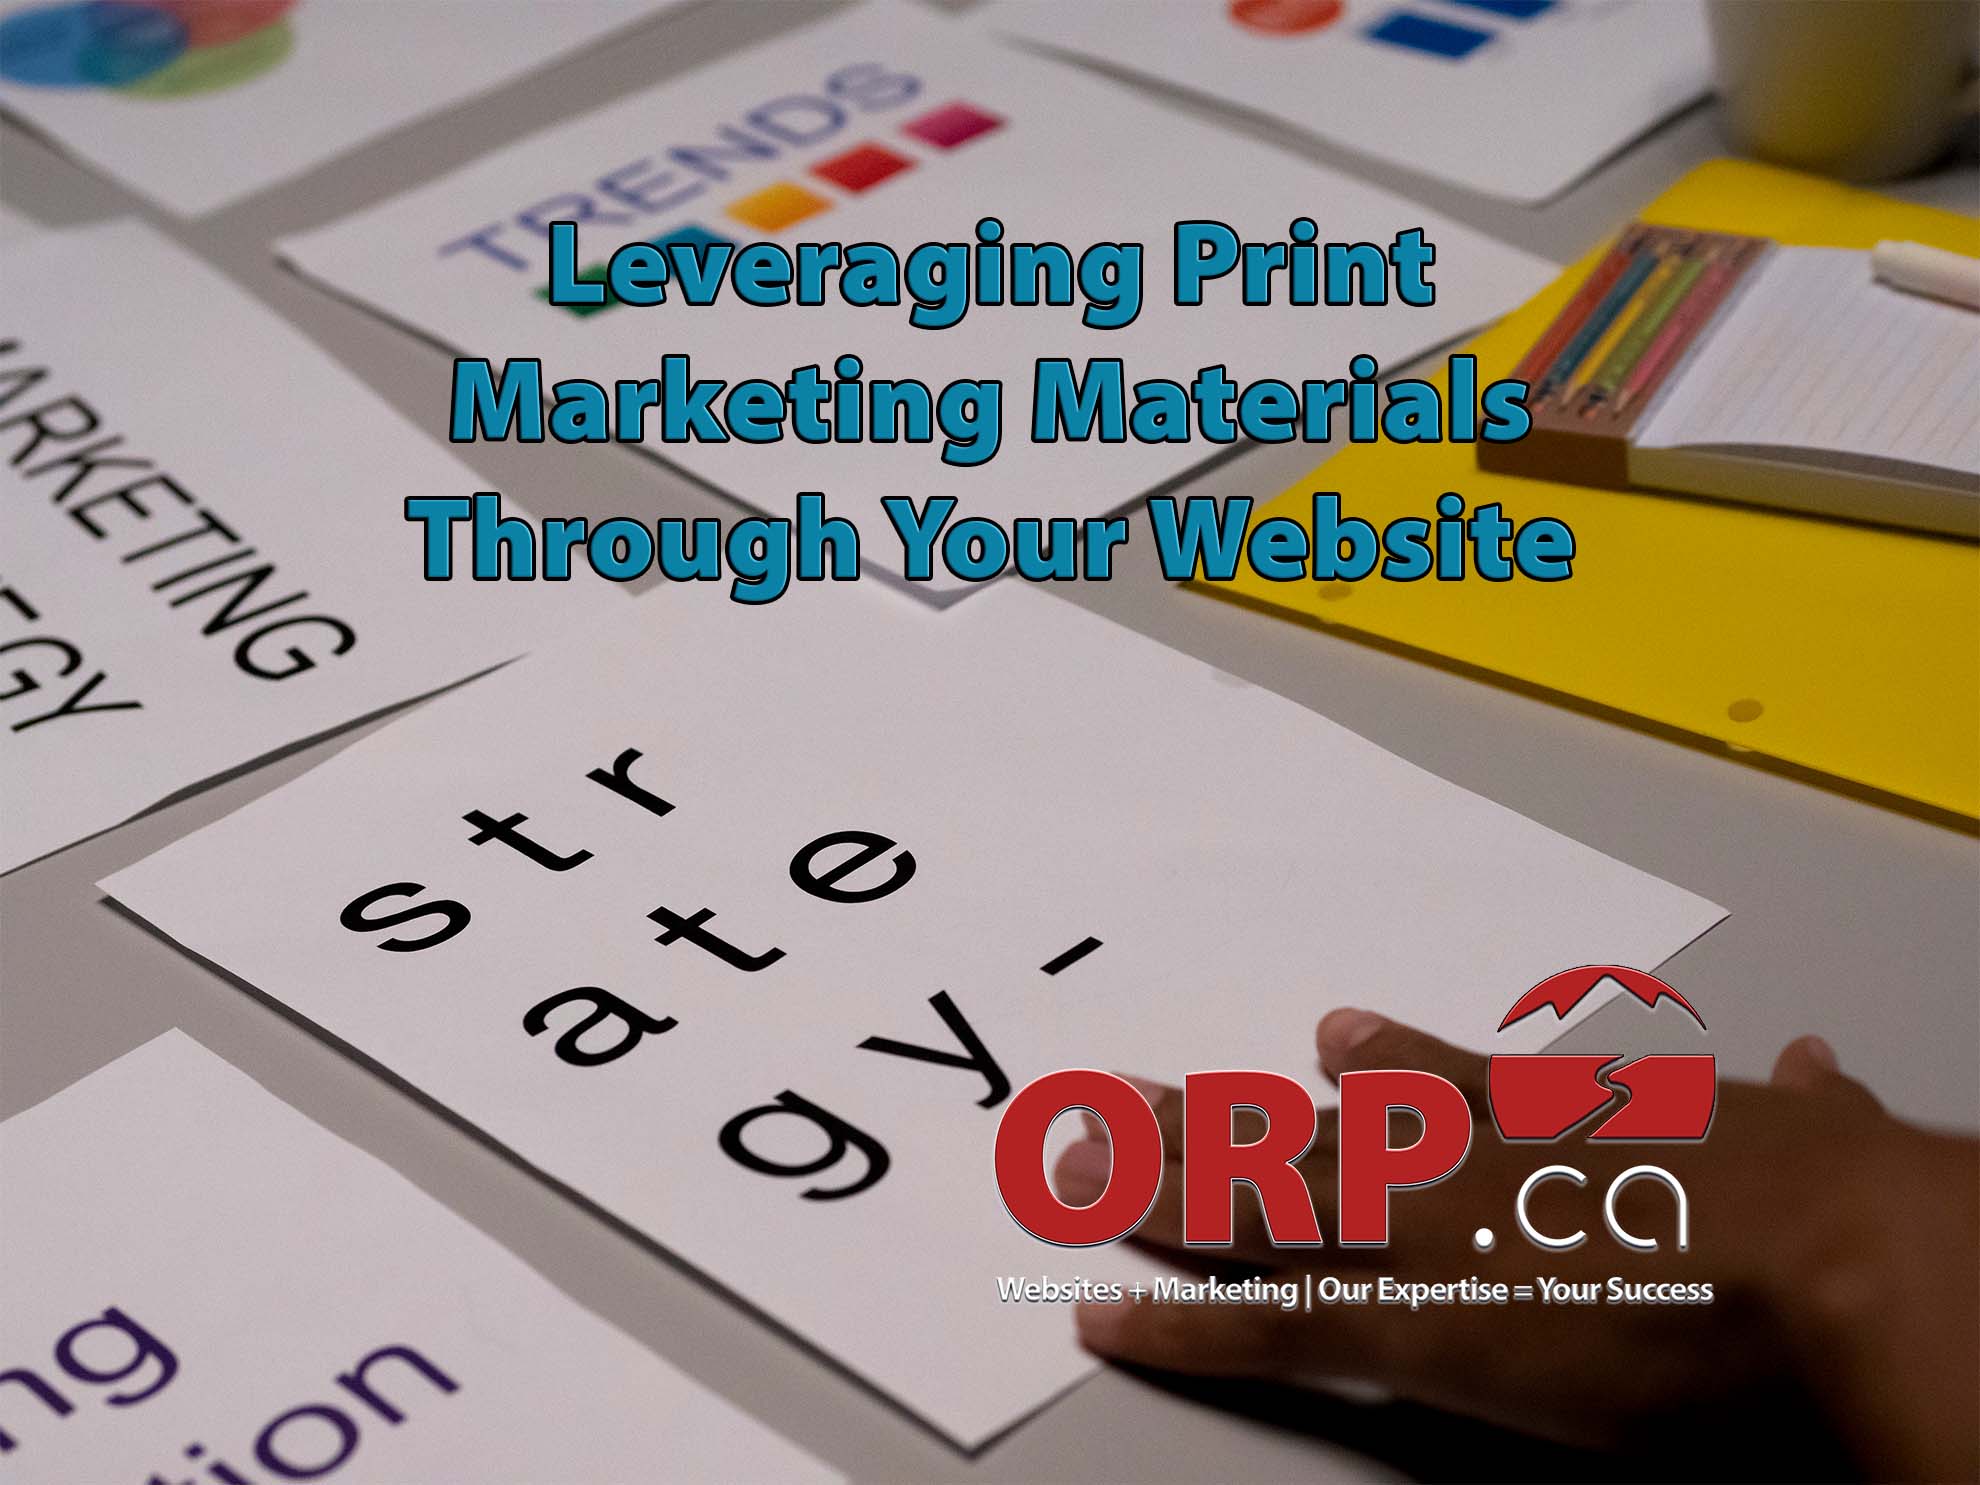 Leveraging Print Marketing Materials Through Your Website a small business digital marketing article from ORP.ca - Website design and support, digital marketing and consulting services